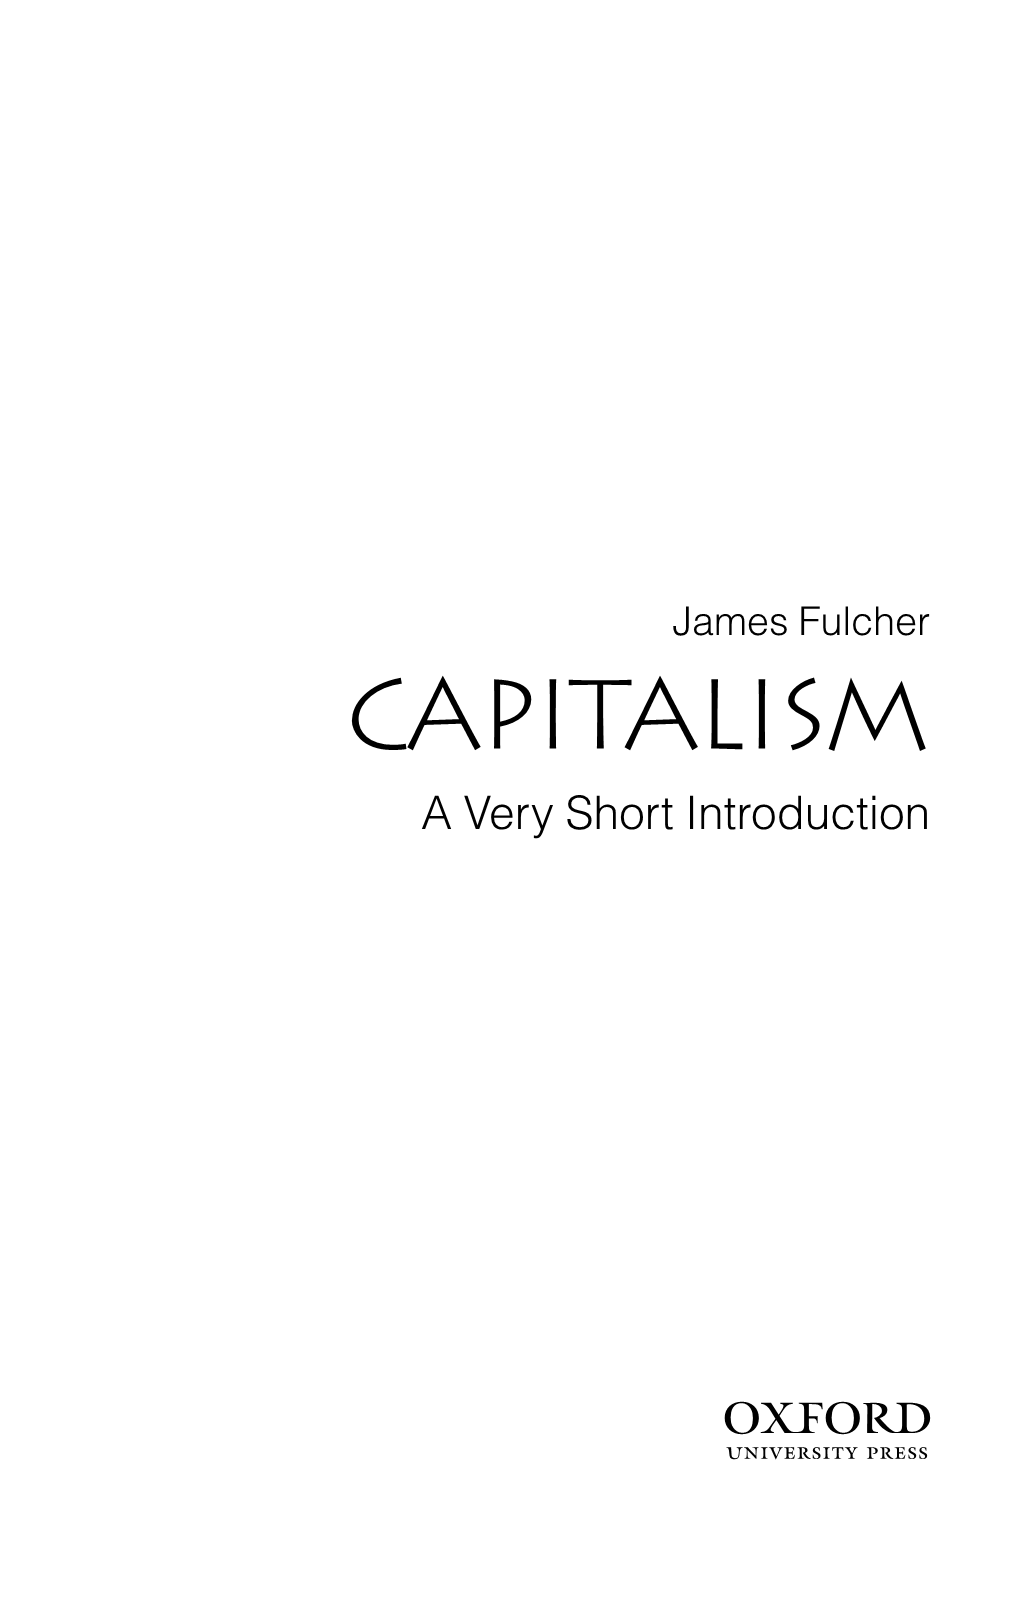 A Very Short Introduction — Capitalism